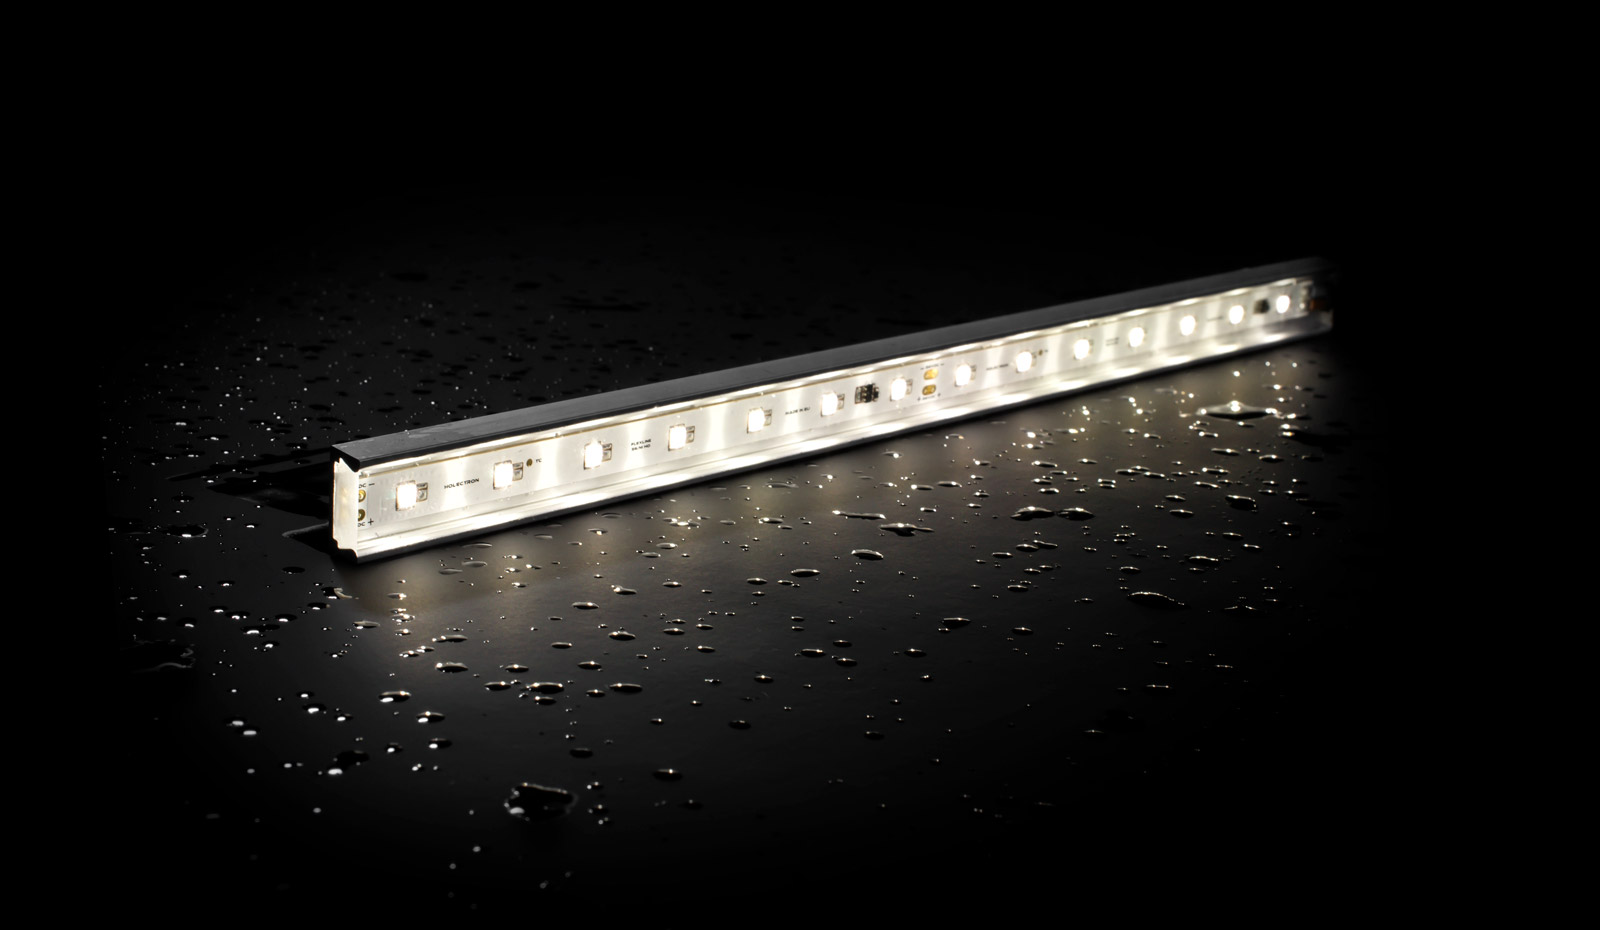 IP67 rated for outdoor applications with NICHIA LED strip lights